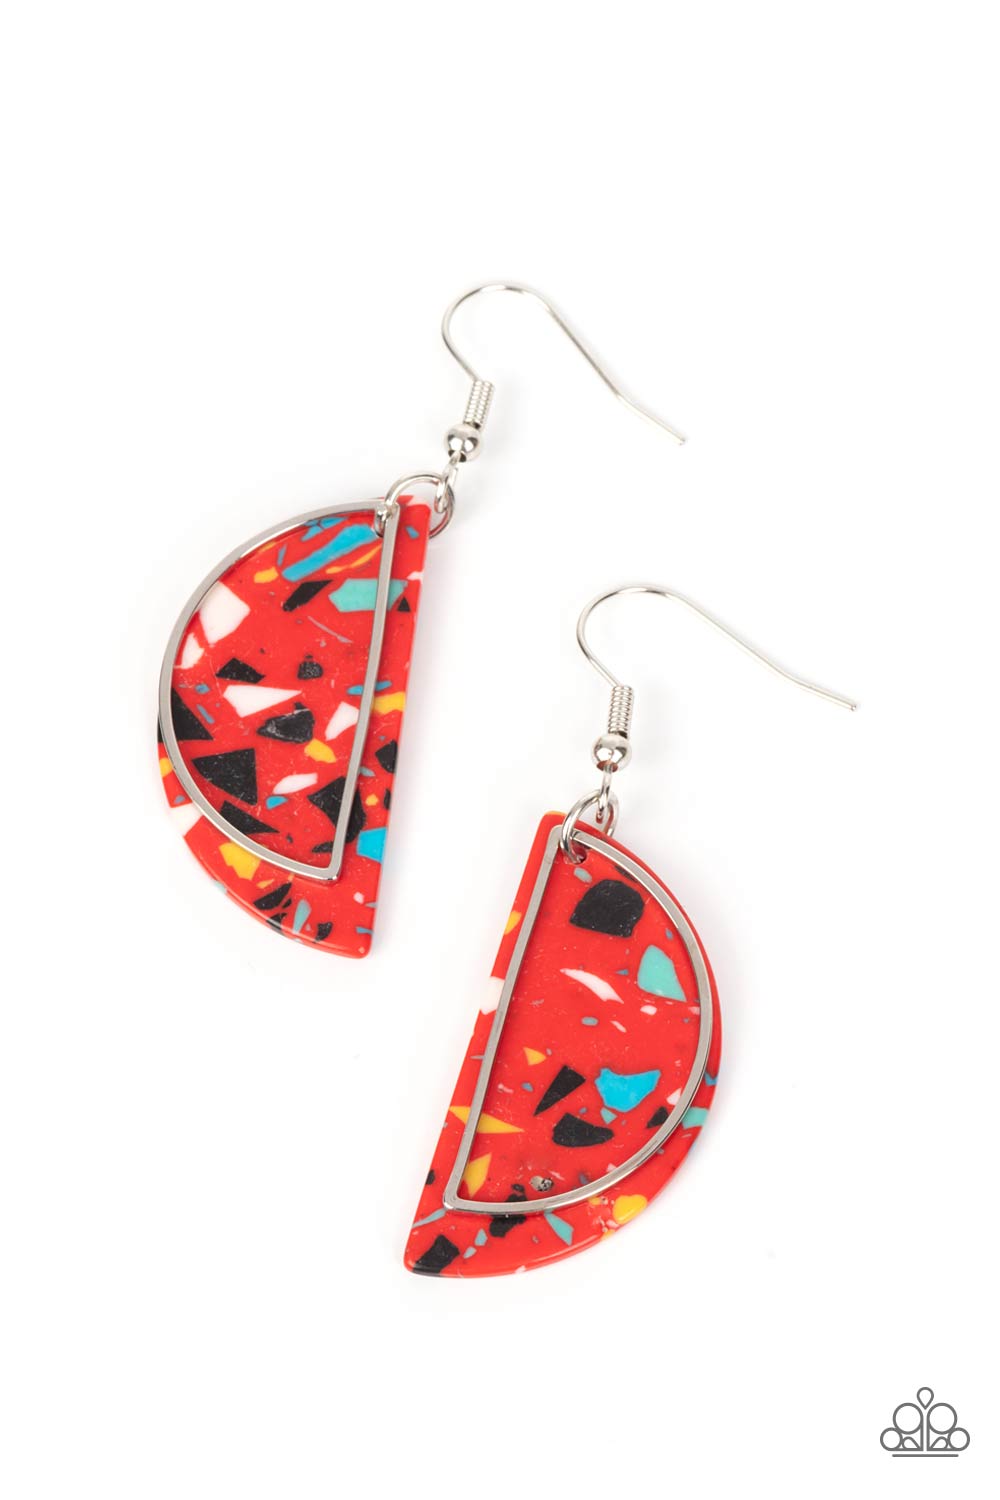 Flashdance Fashionista Paparazzi Accessories Earrings Red